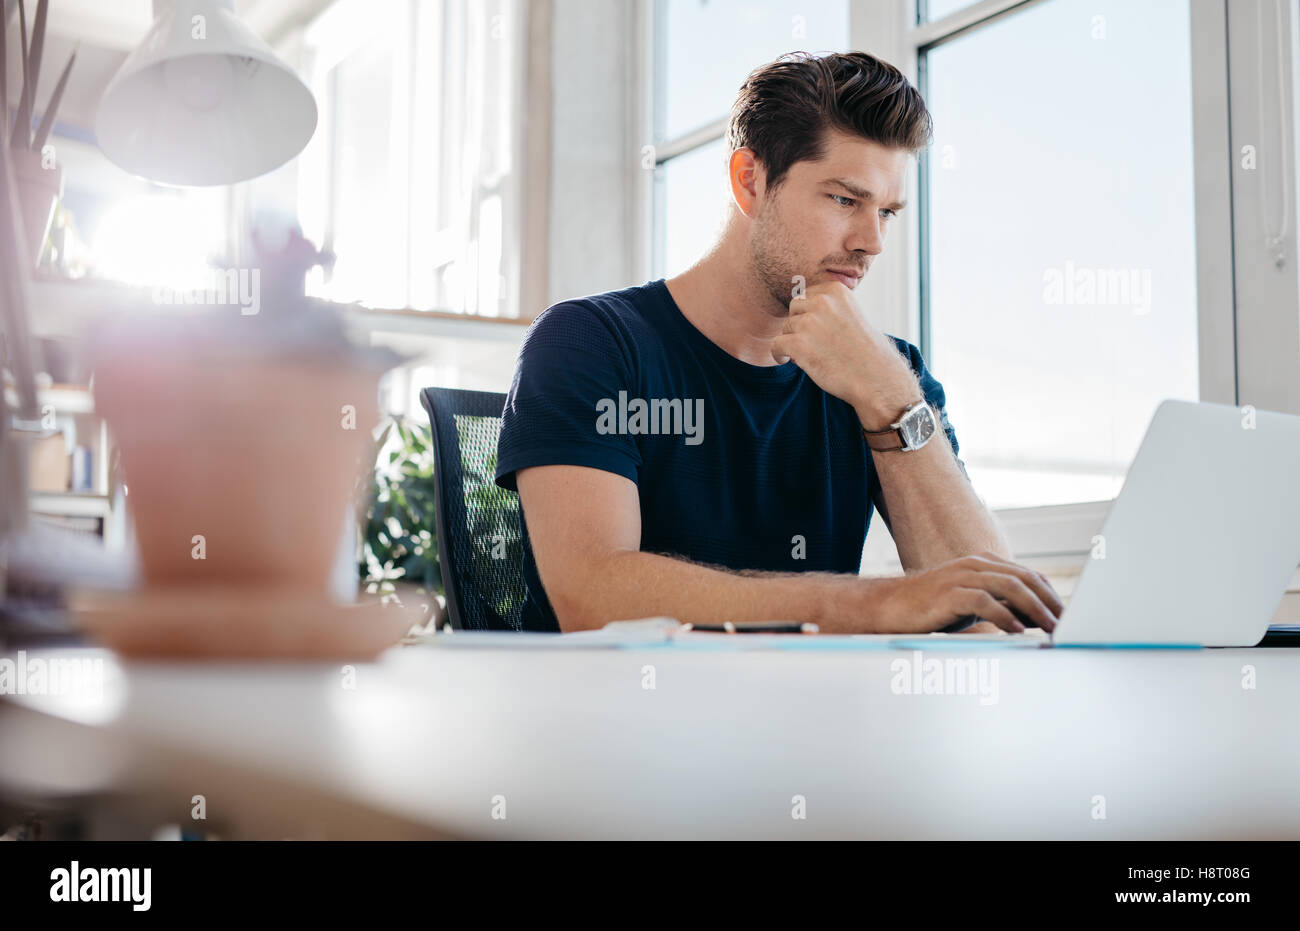 Handsome young man using laptop. Businessman browsing internet on his laptop. Stock Photo